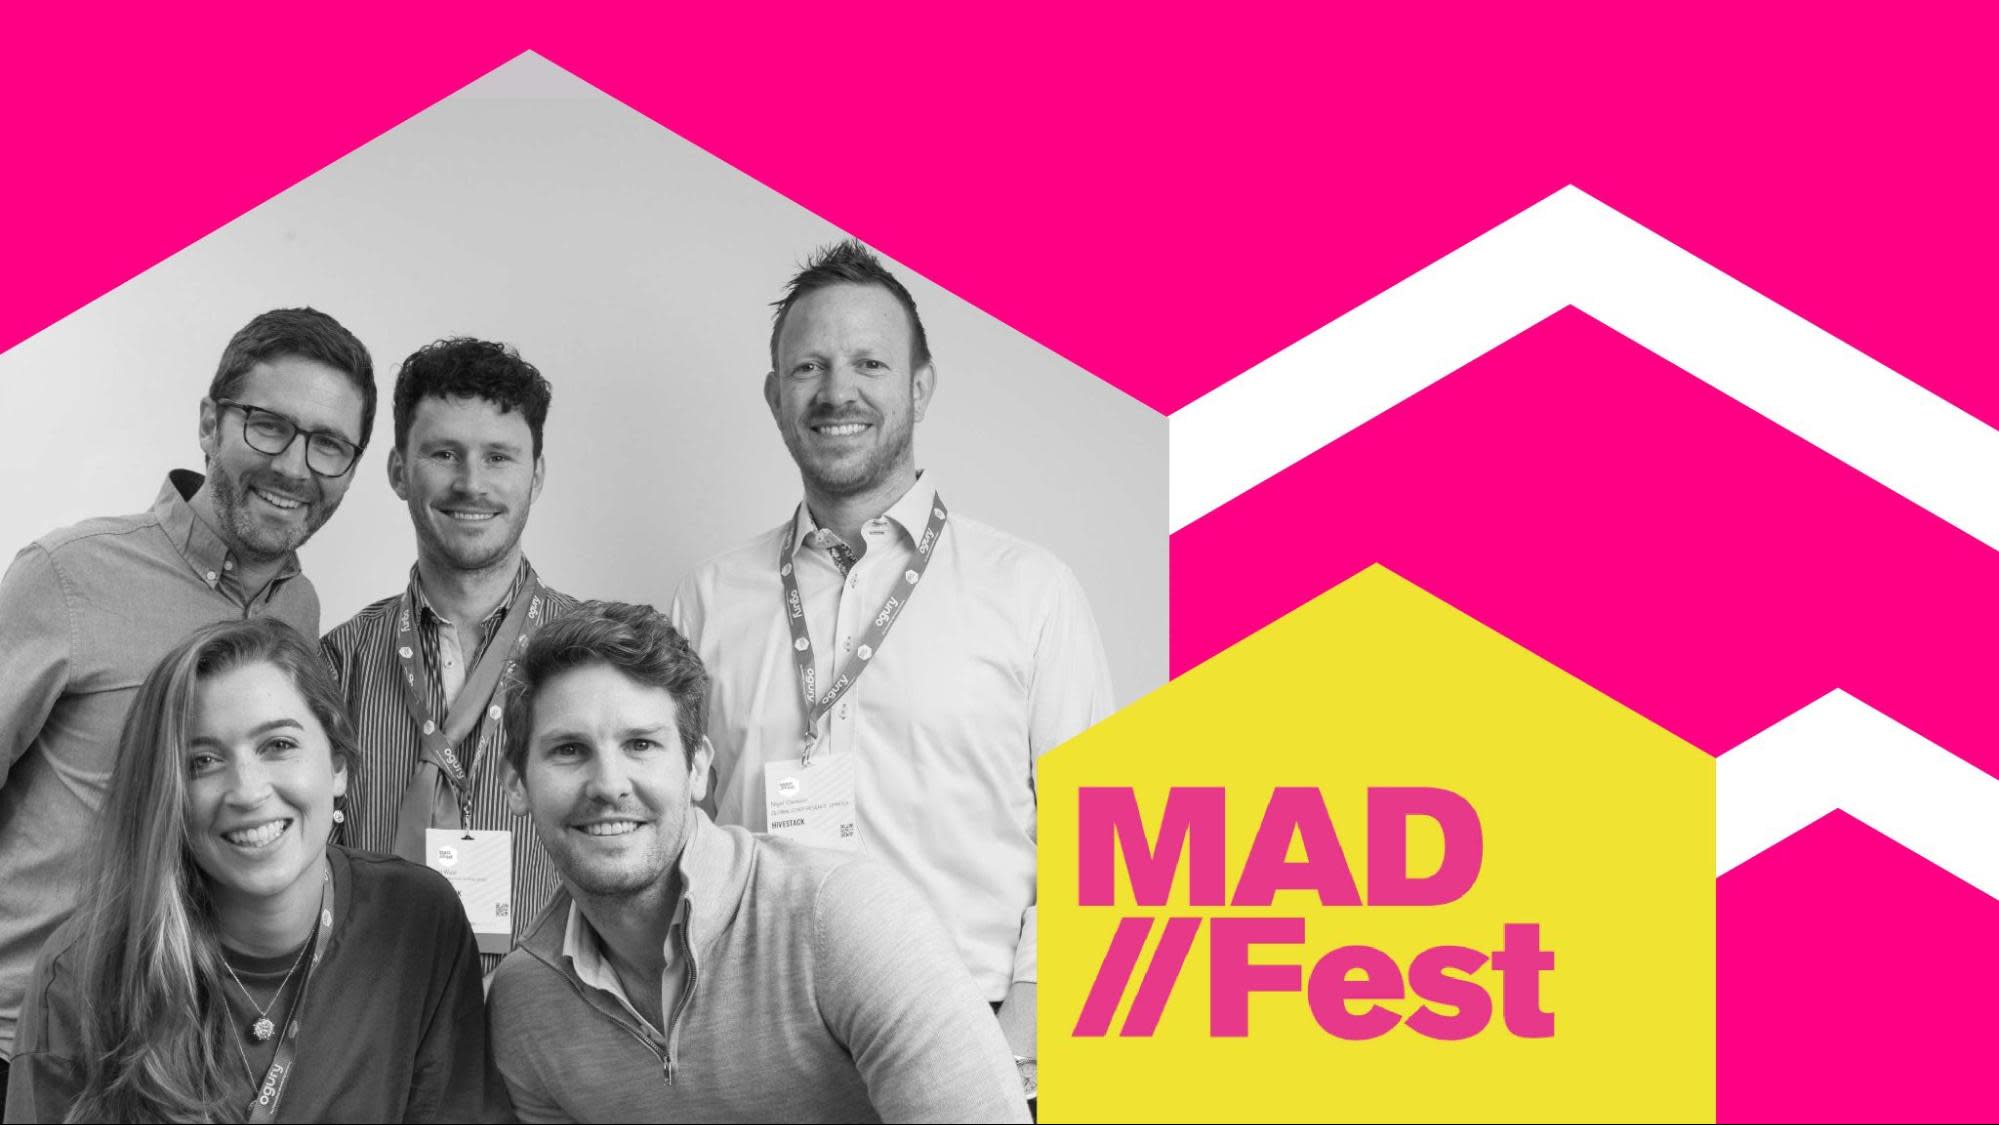 Team Hivestack showcases the power of programmatic in real-time at Madfest UK.